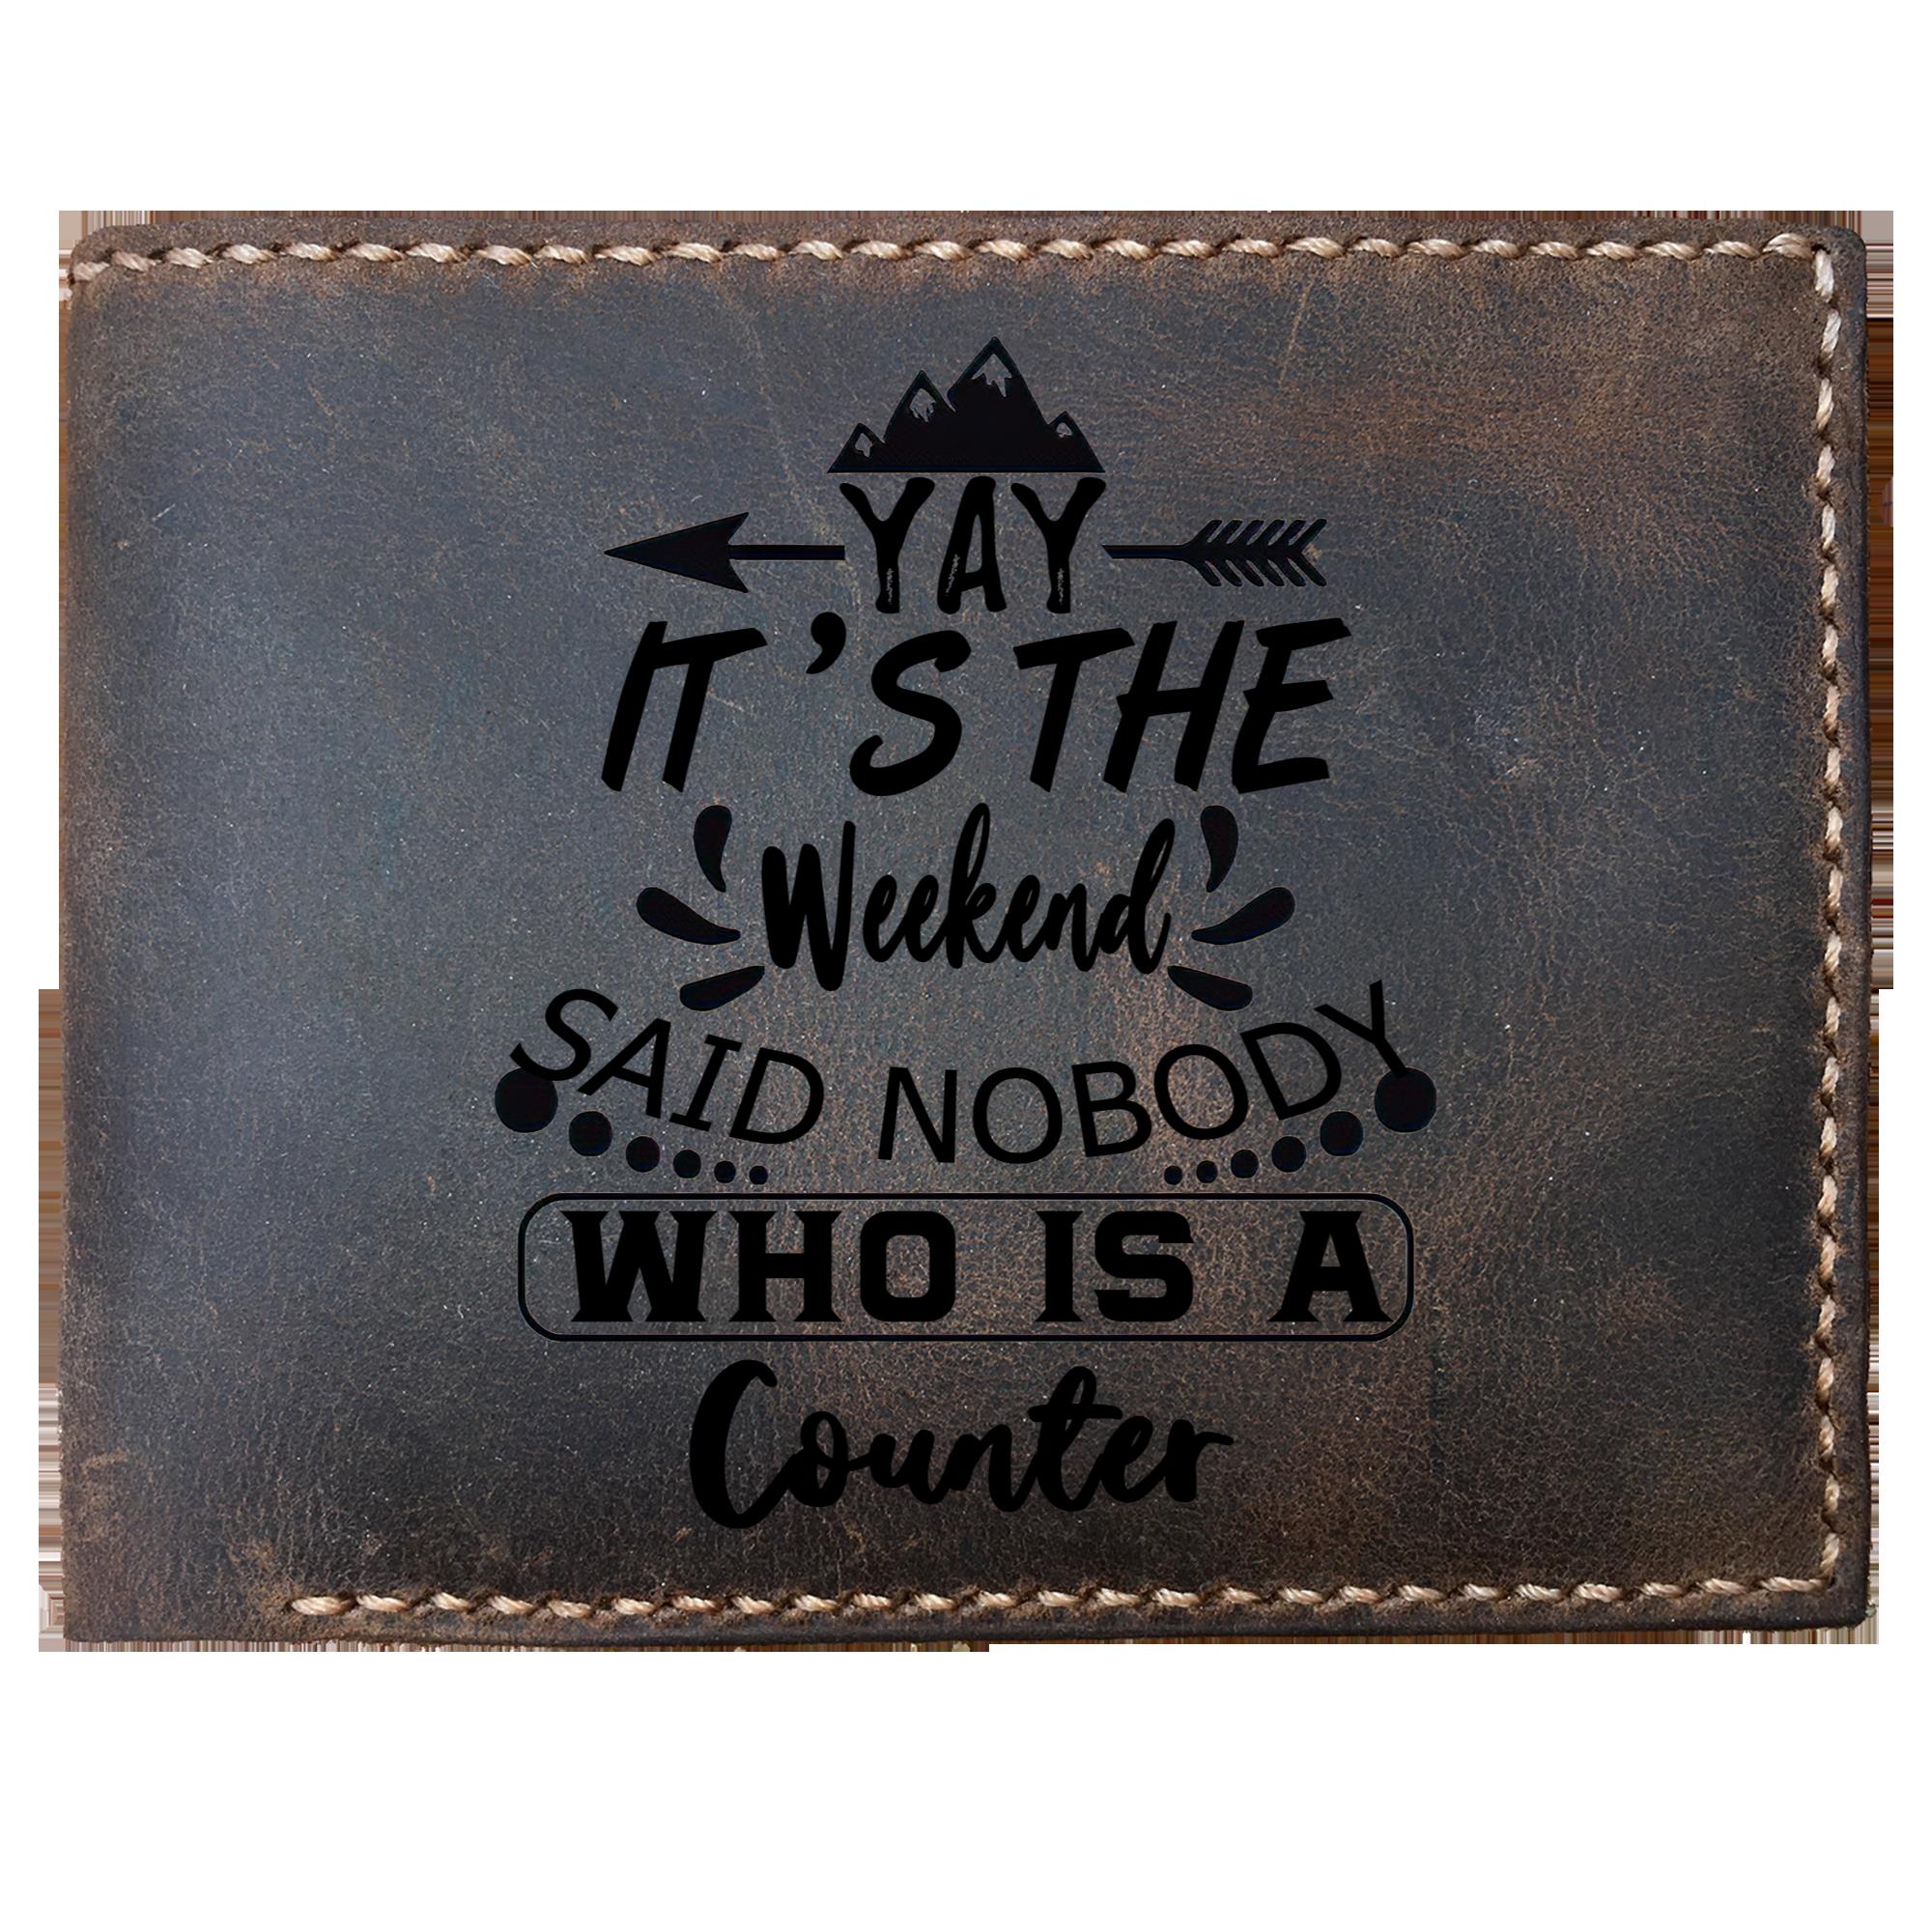 Skitongifts Funny Custom Laser Engraved Bifold Leather Wallet For Men, It's The Weekend Said Nobody Who Is A Counter, Father's Day Gifts